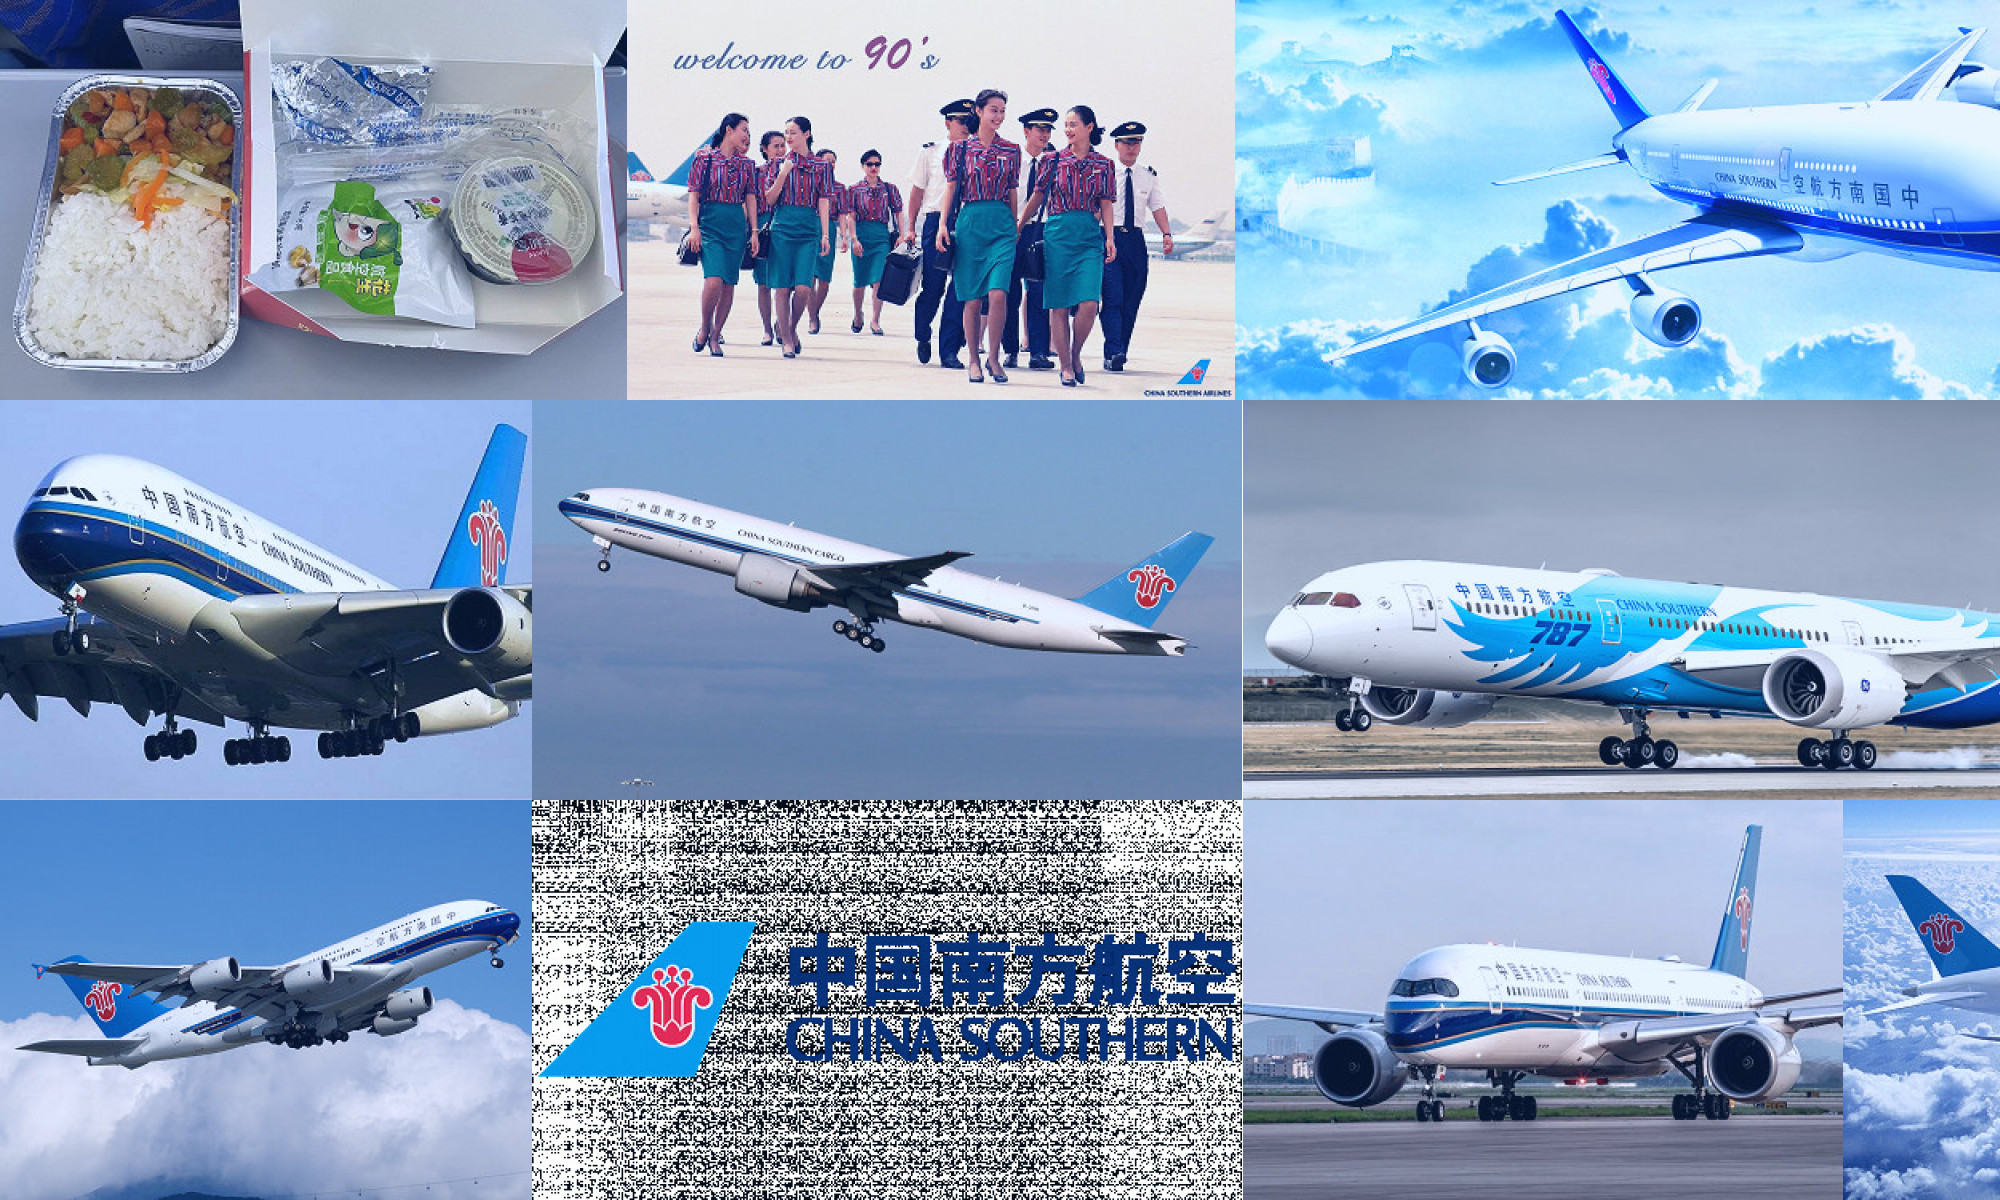 china southern airlines